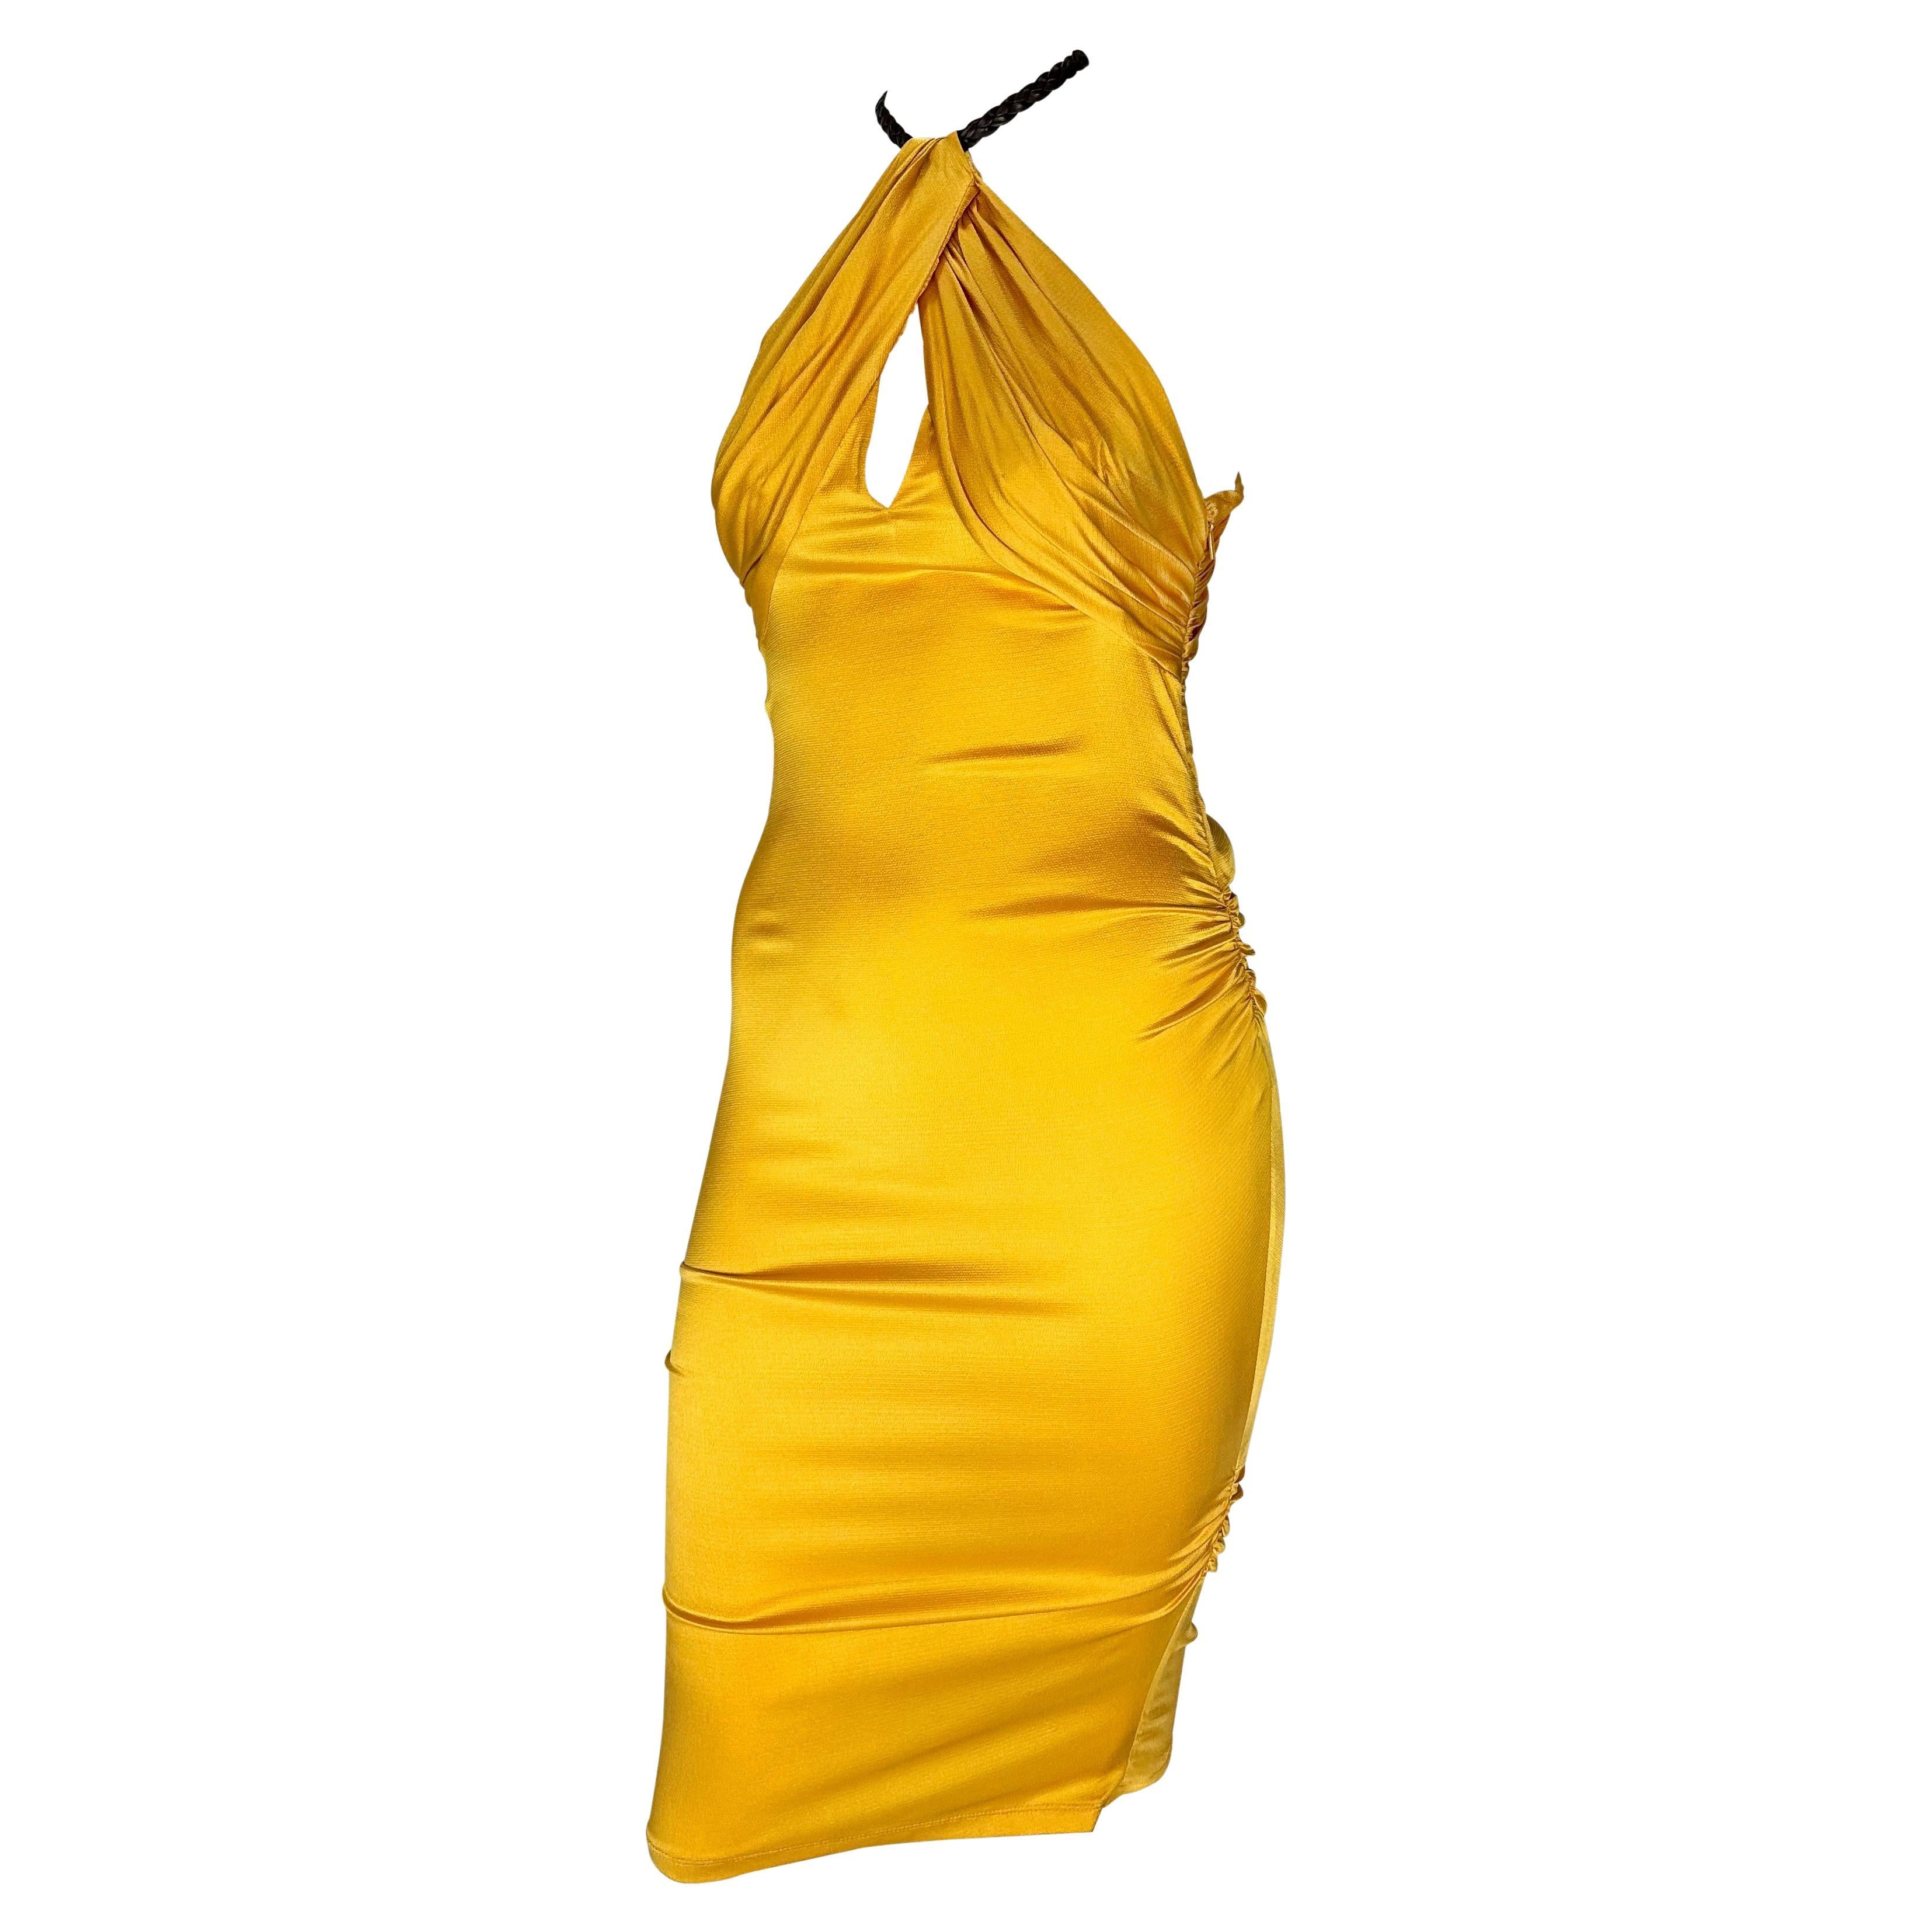 beyonce in yellow dress